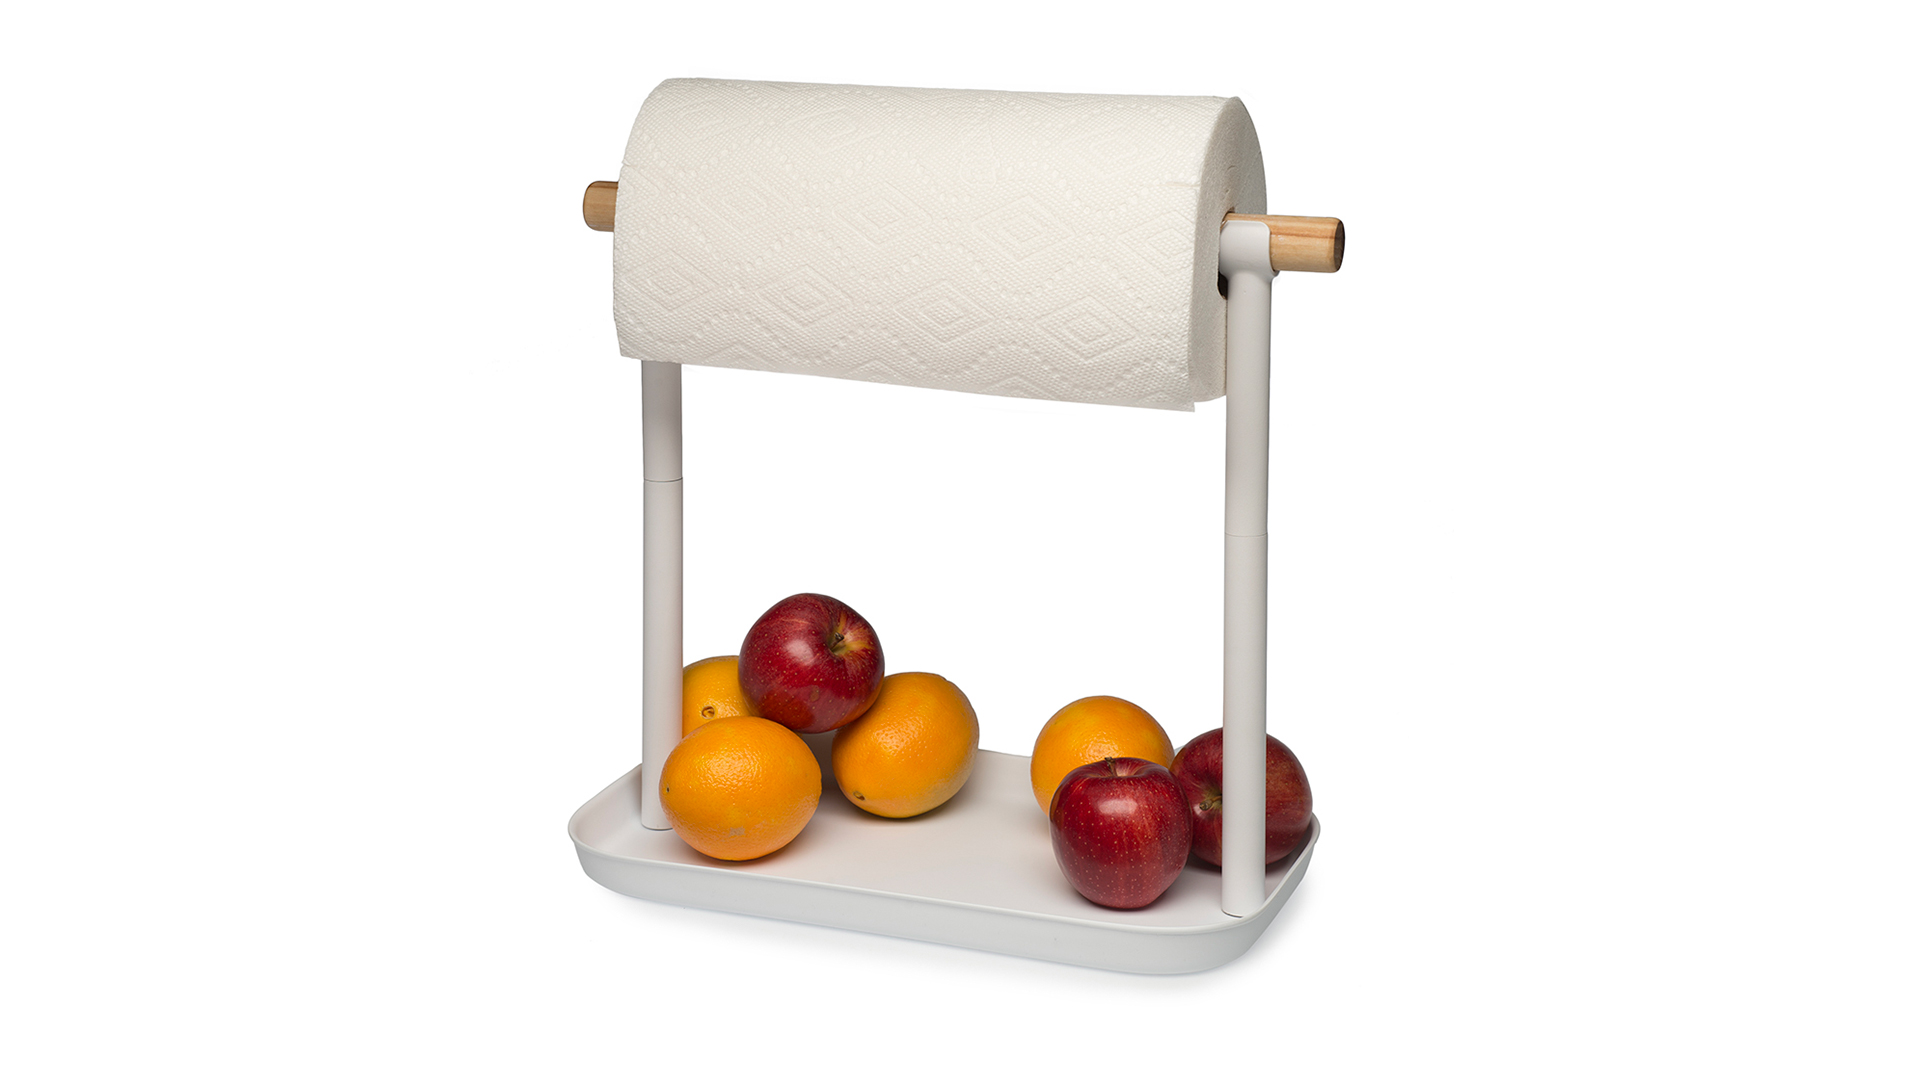 Paper towel roll put on wooden top cross pole with assorted fruit sitting inside bottom tray